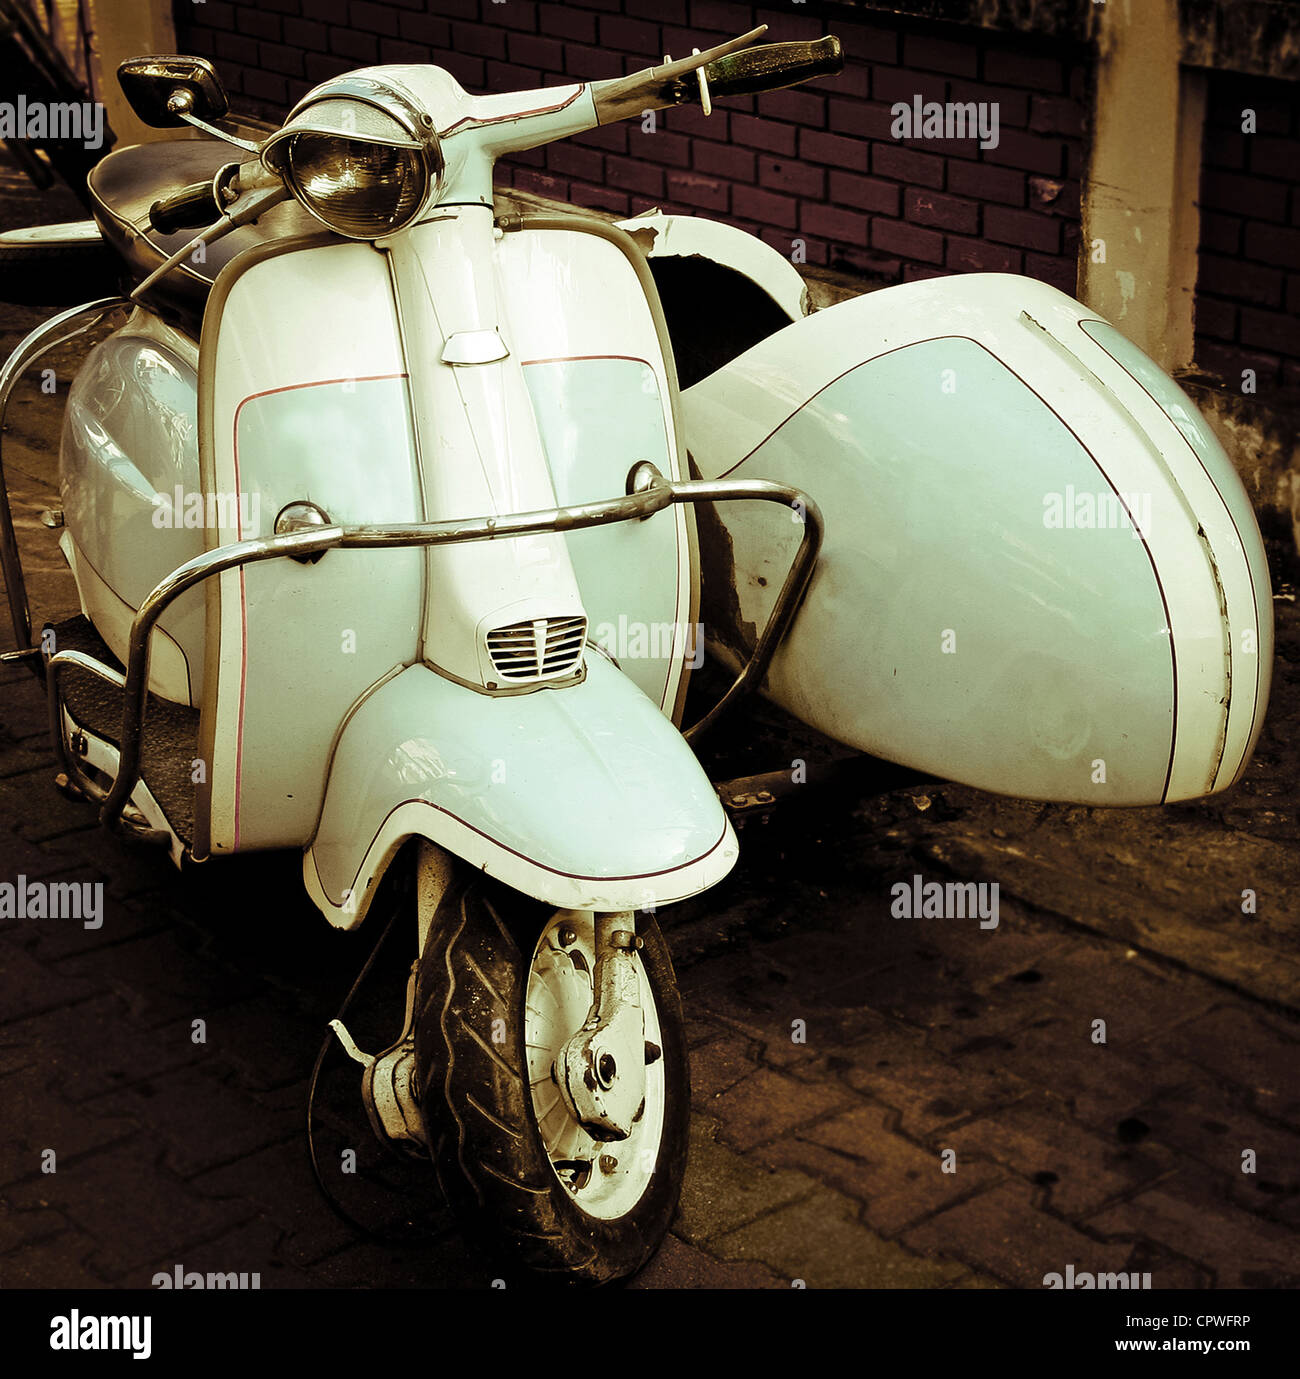 old scooter with sidecar Stock Photo